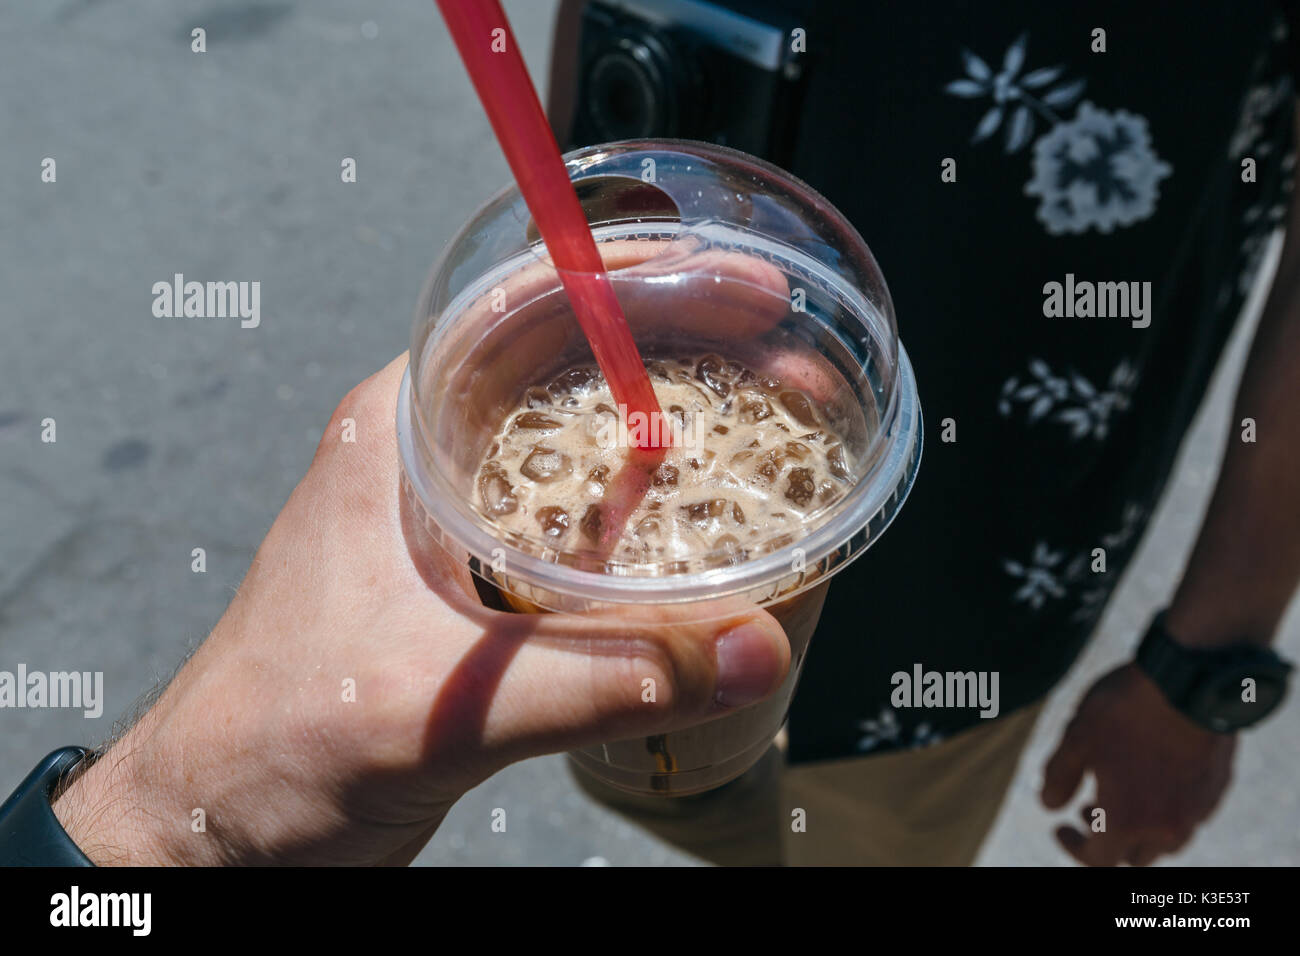 https://c8.alamy.com/comp/K3E53T/coffee-with-ice-in-hand-K3E53T.jpg